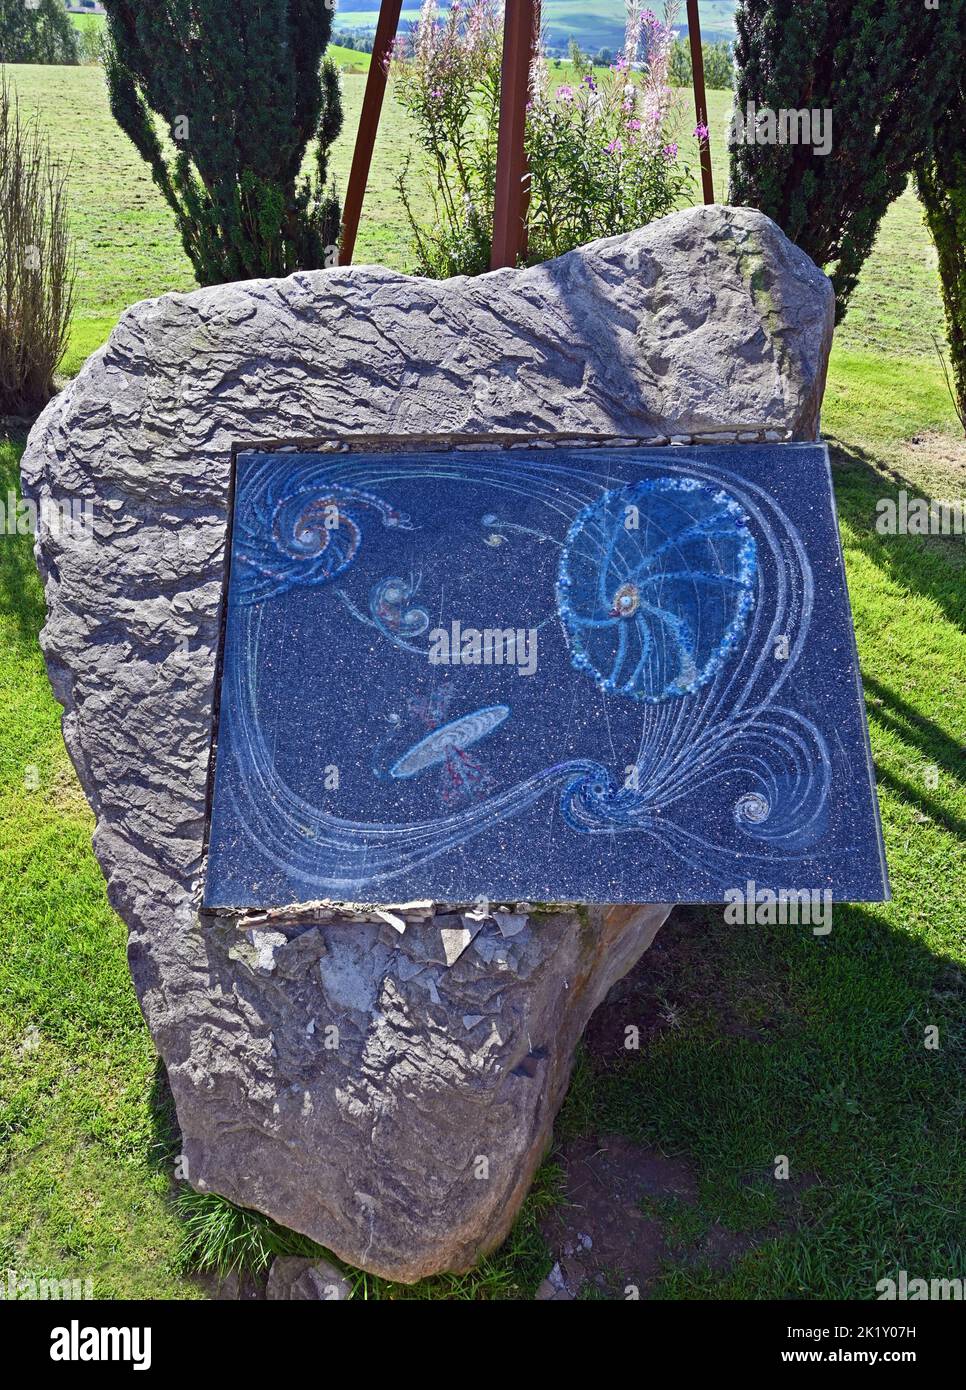 'Cosmic Collisions' (detail), outdoor artwork by Charles Jencks. Crawick Multiverse, Sanquhar, Dumfries and Galloway, Scotland, United Kingdom, Europe Stock Photo